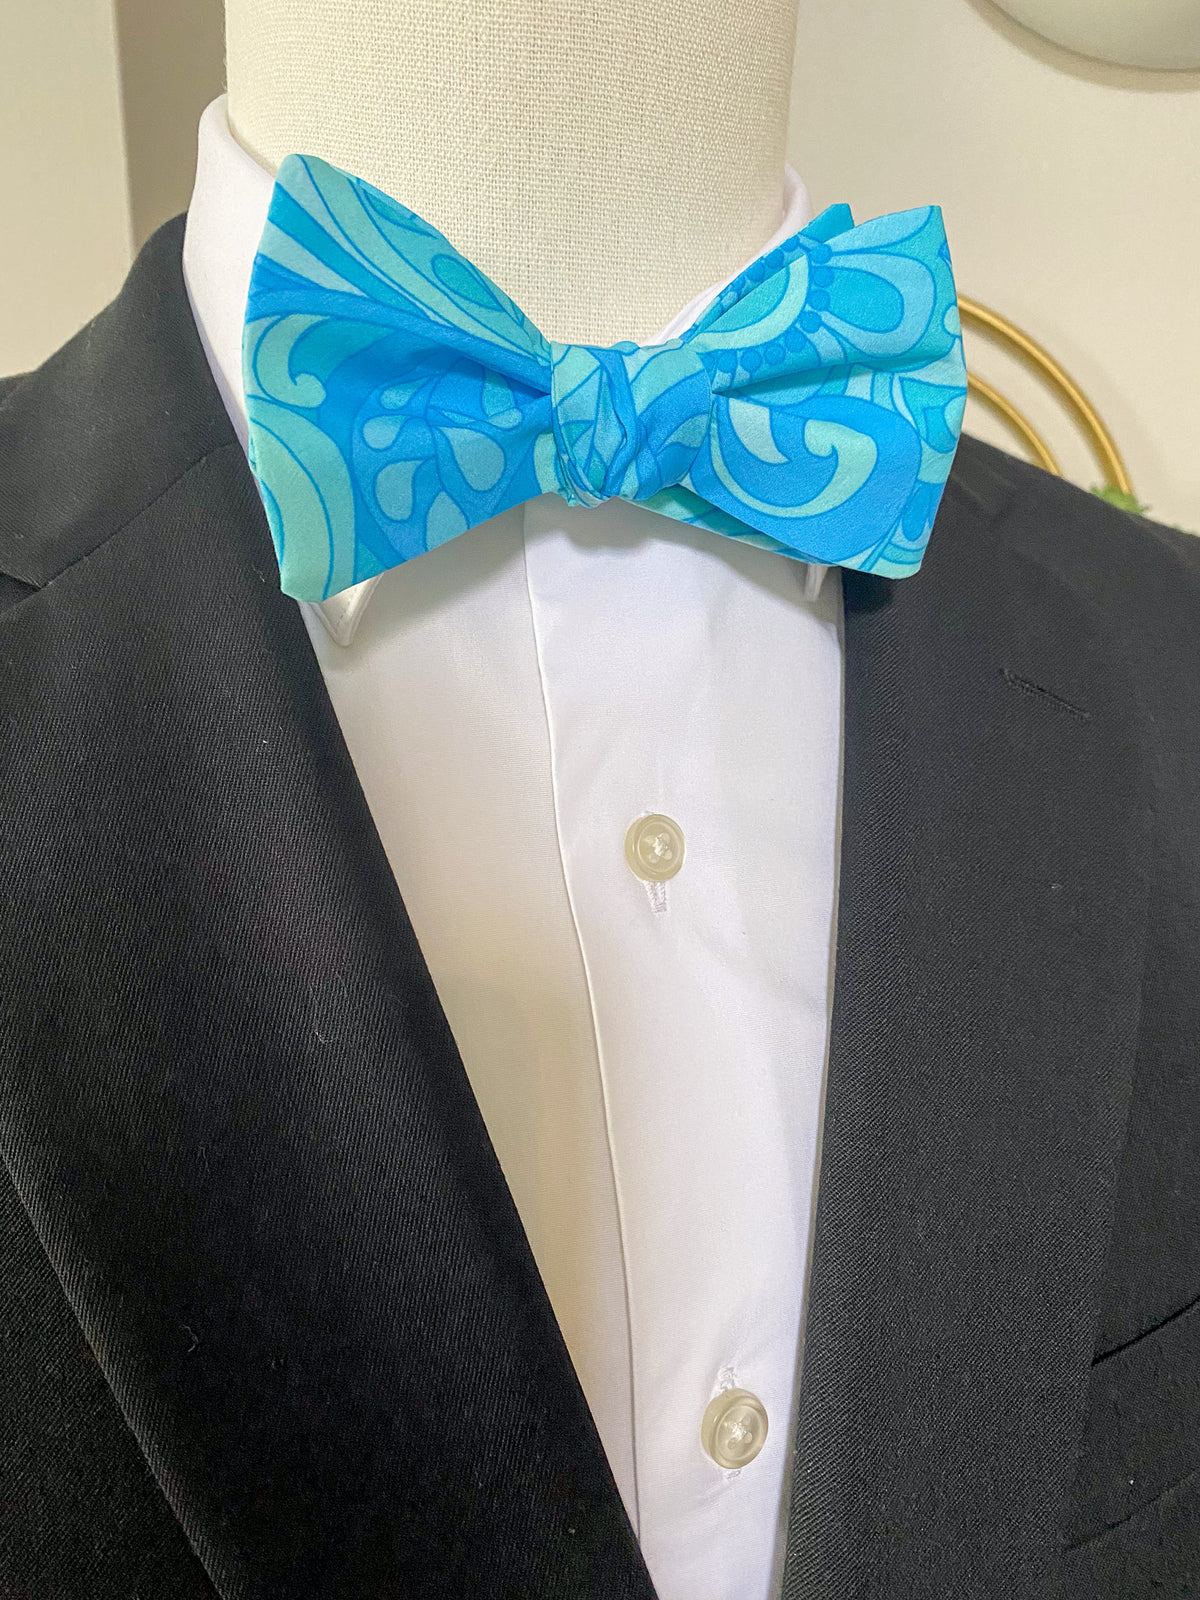 Groovy Teal and Blue Bow Tie